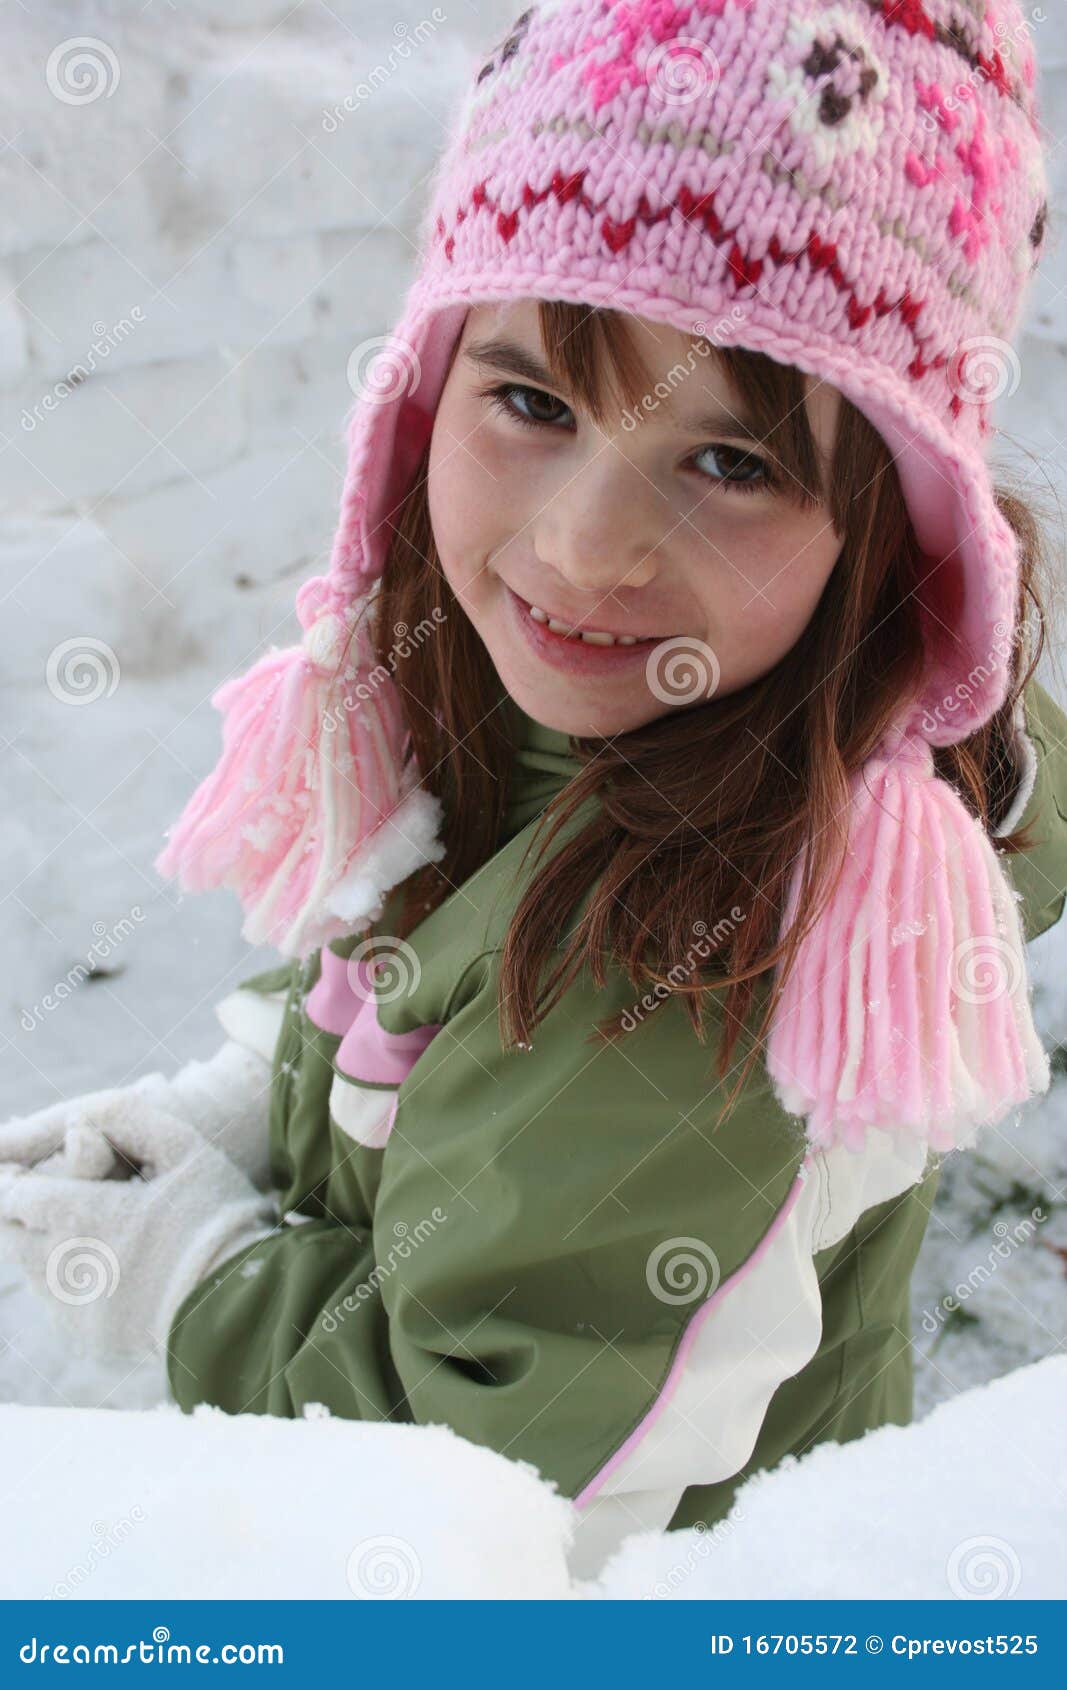 Girl in winter clothes stock photo. Image of girl, chill - 16705572